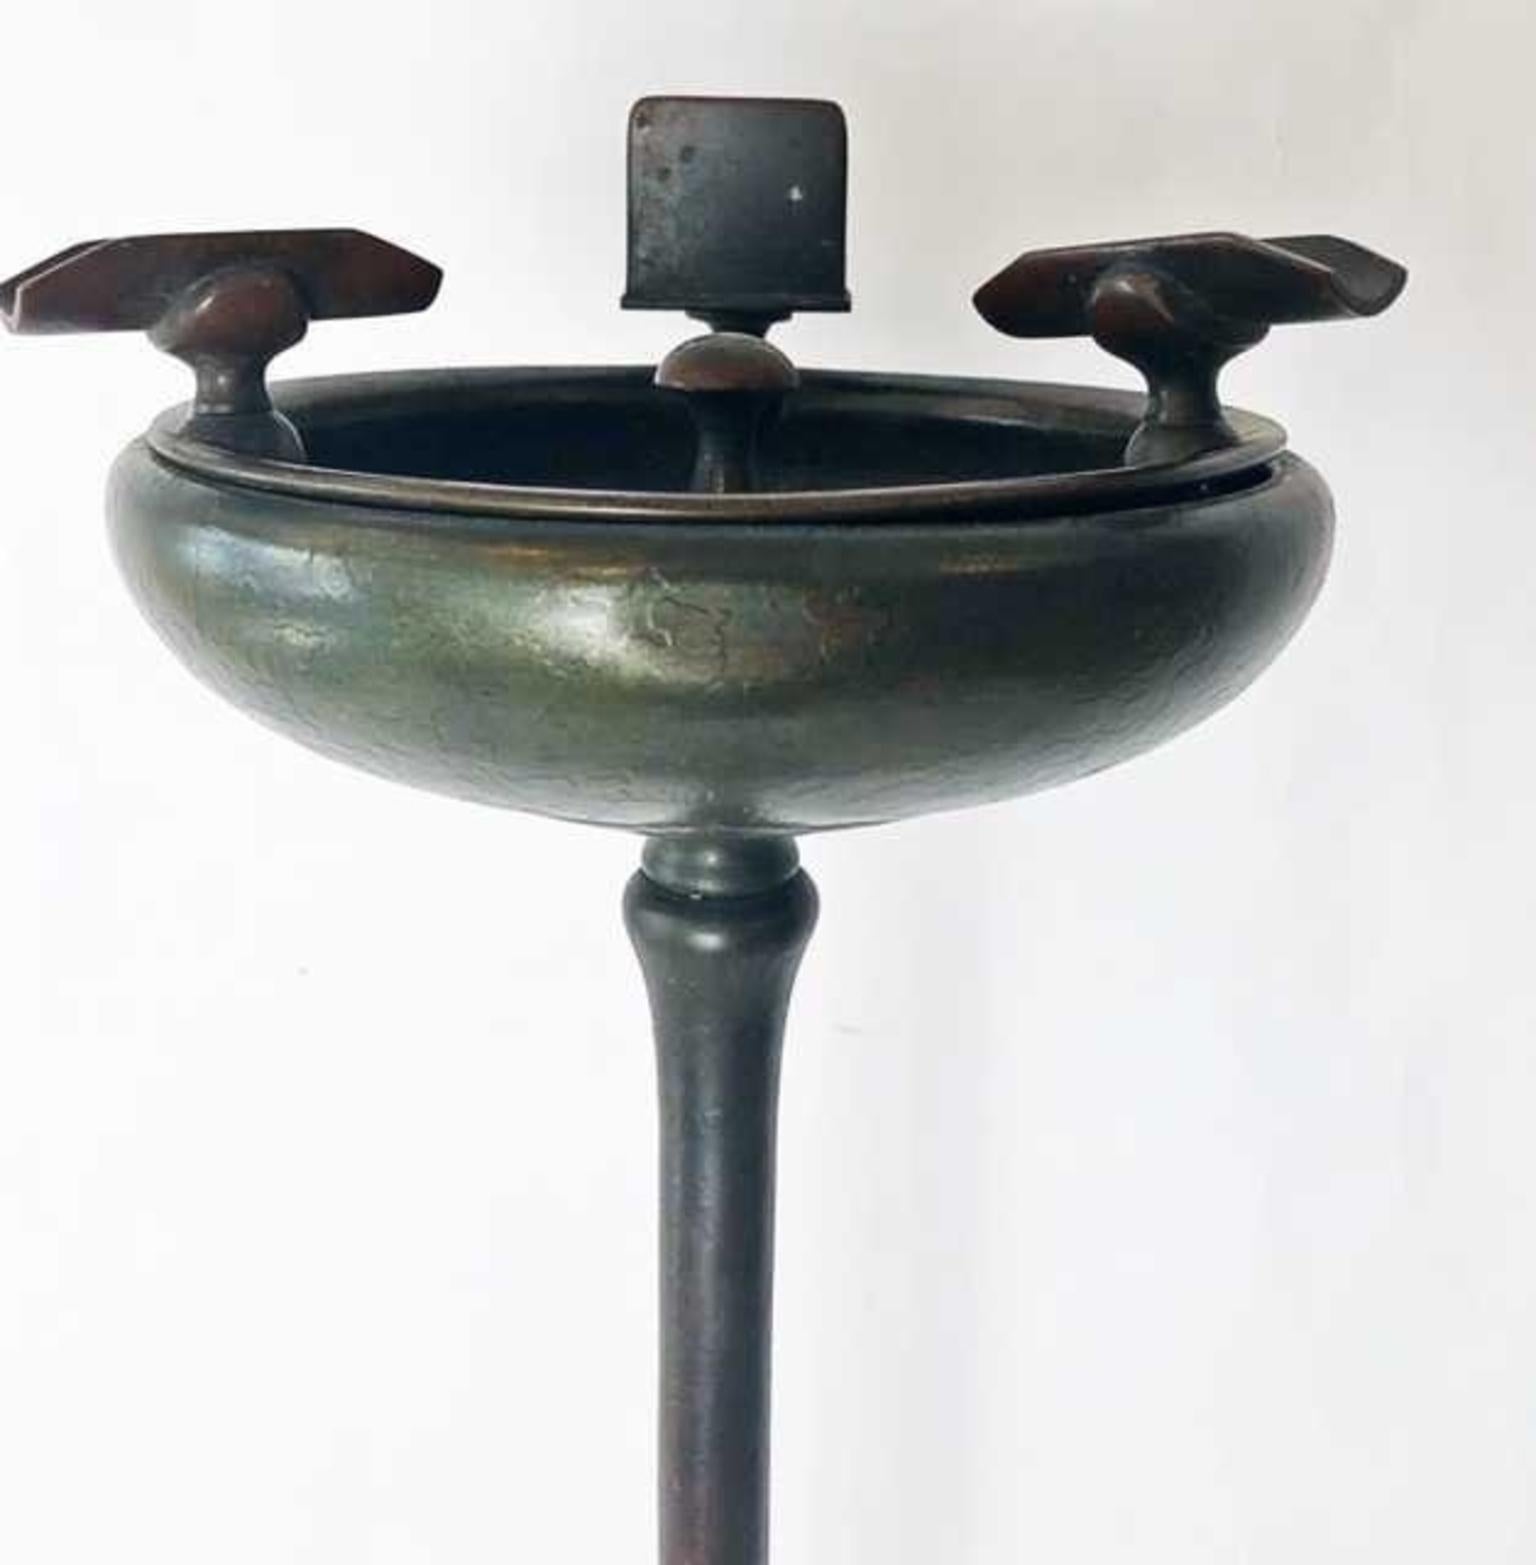 Tiffany Studios patinated bronze standing ash receiver 
Marked Tiffany Studios, 1640.
The columnar stem with circular spreading foot, beneath a deep dish with cigar and a match box holder. 
Measures: Height 27 1/2 in.